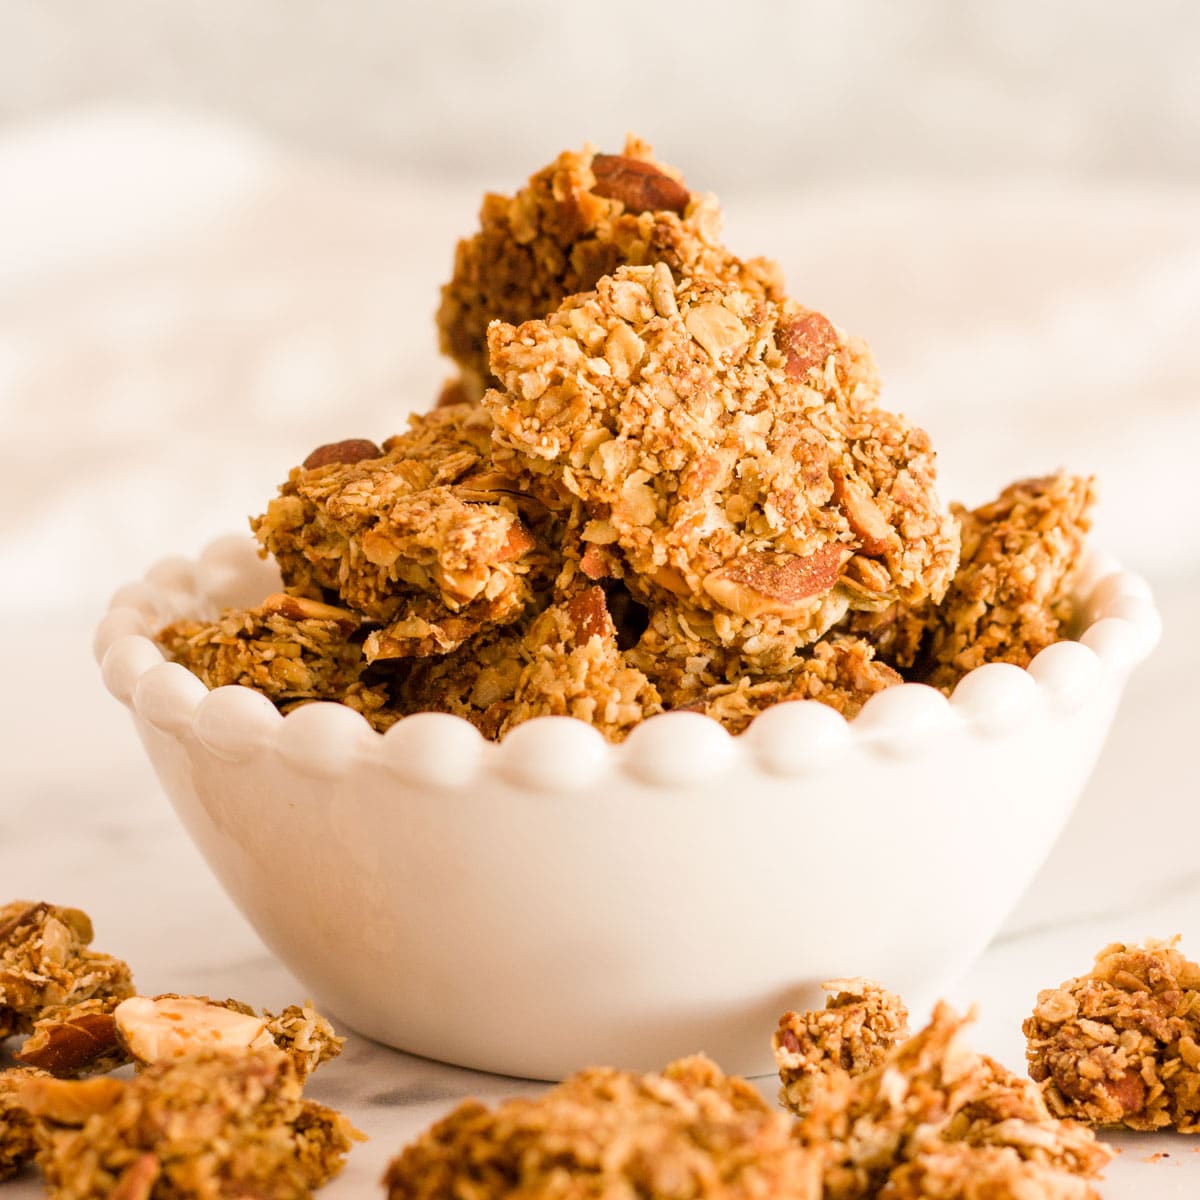 Homemade granola clusters in a white bowl.